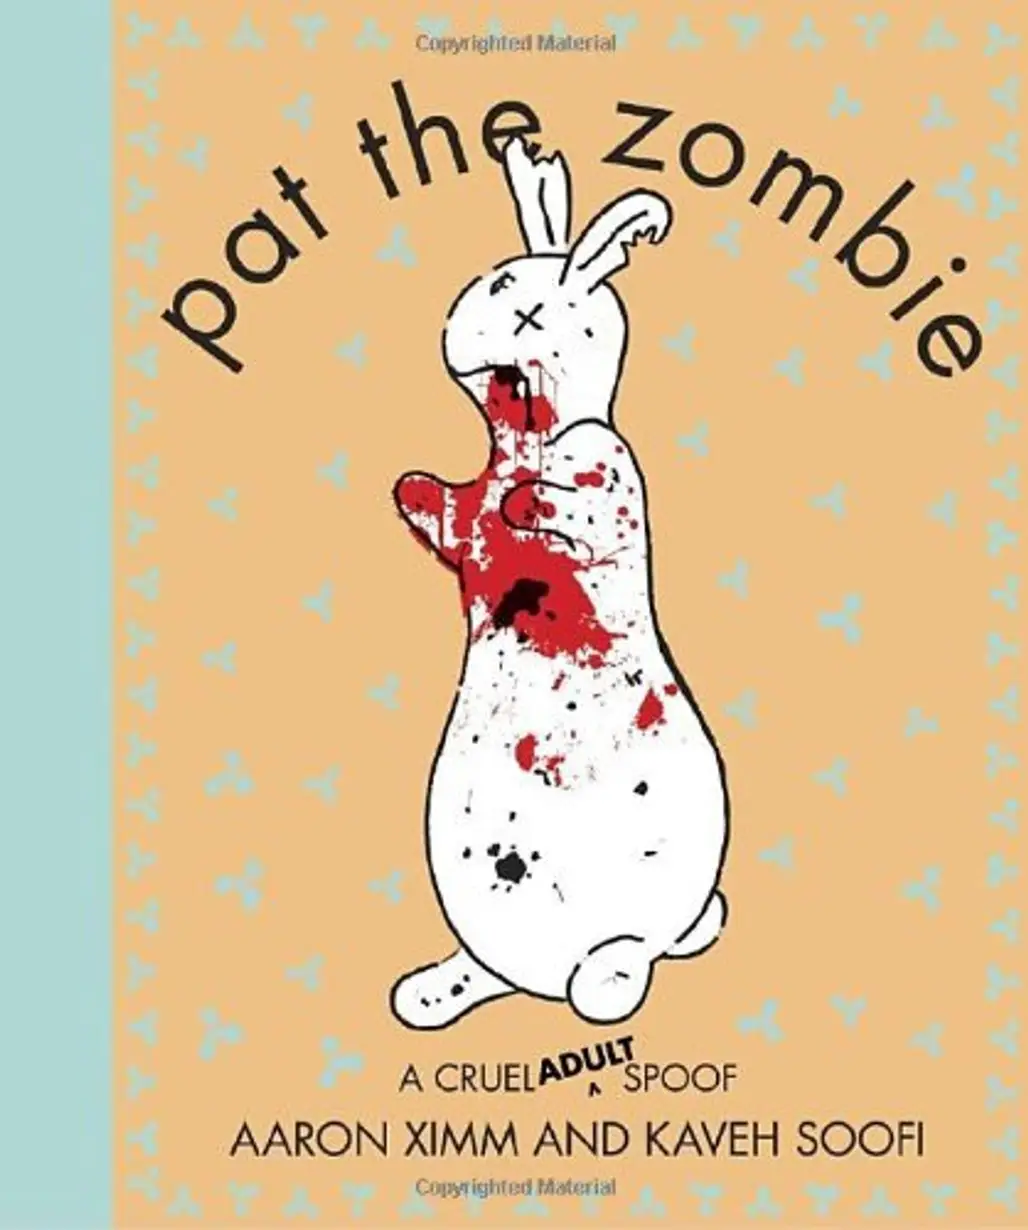 Pat the Zombie: a Cruel (Adult) Spoof by Aaron Ximm